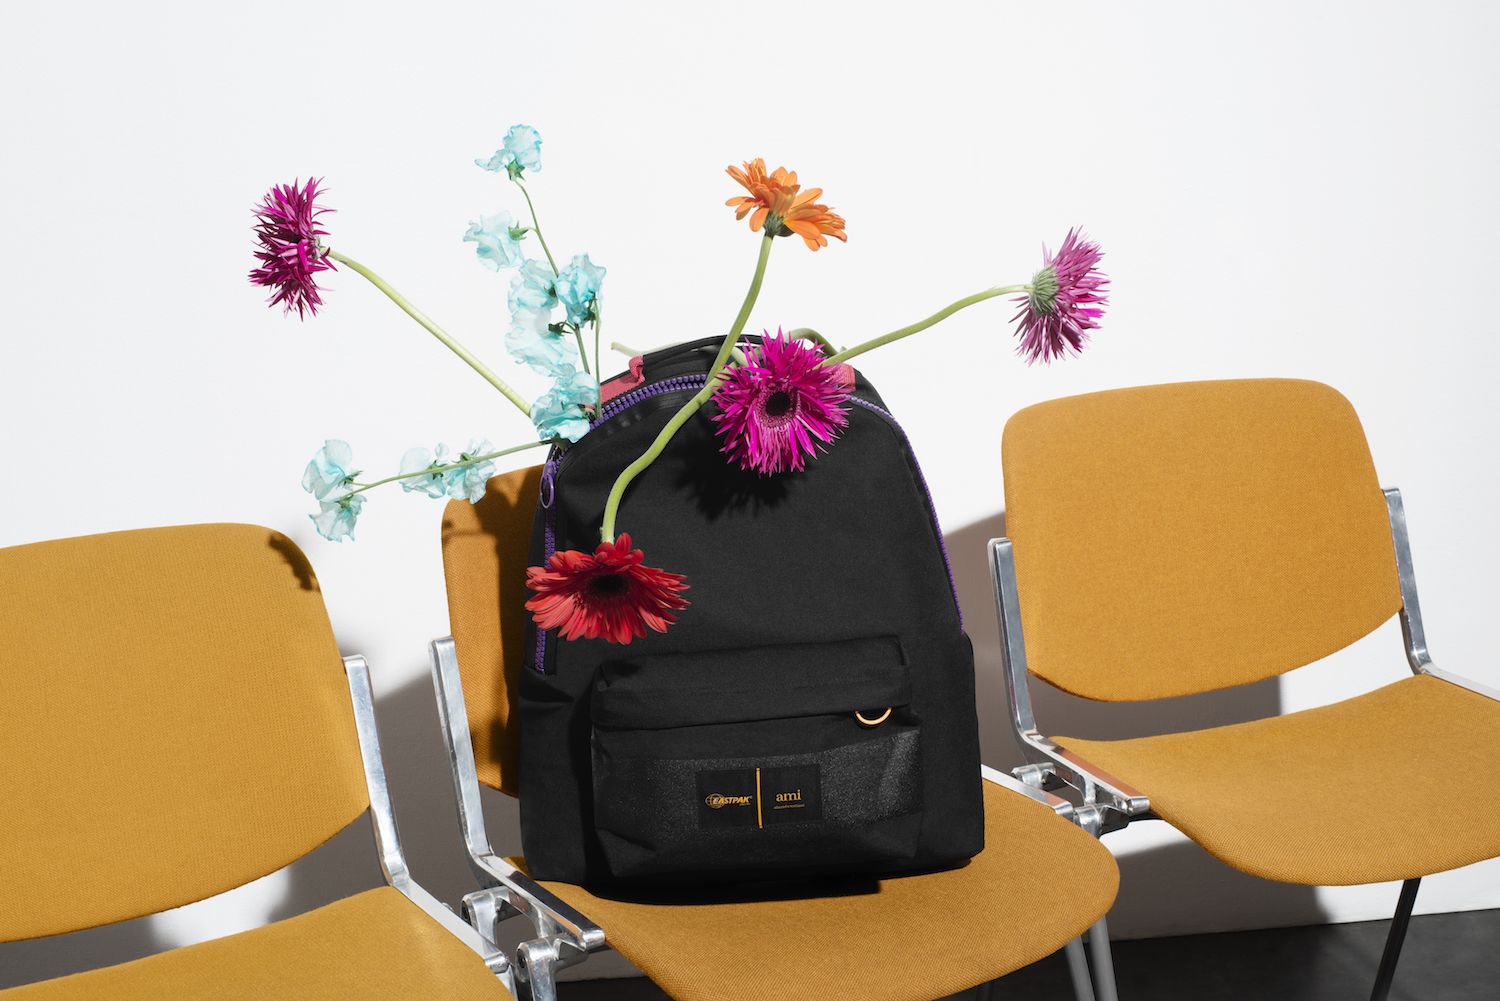 Practicality and creativity in the Eastpak x AMI collection